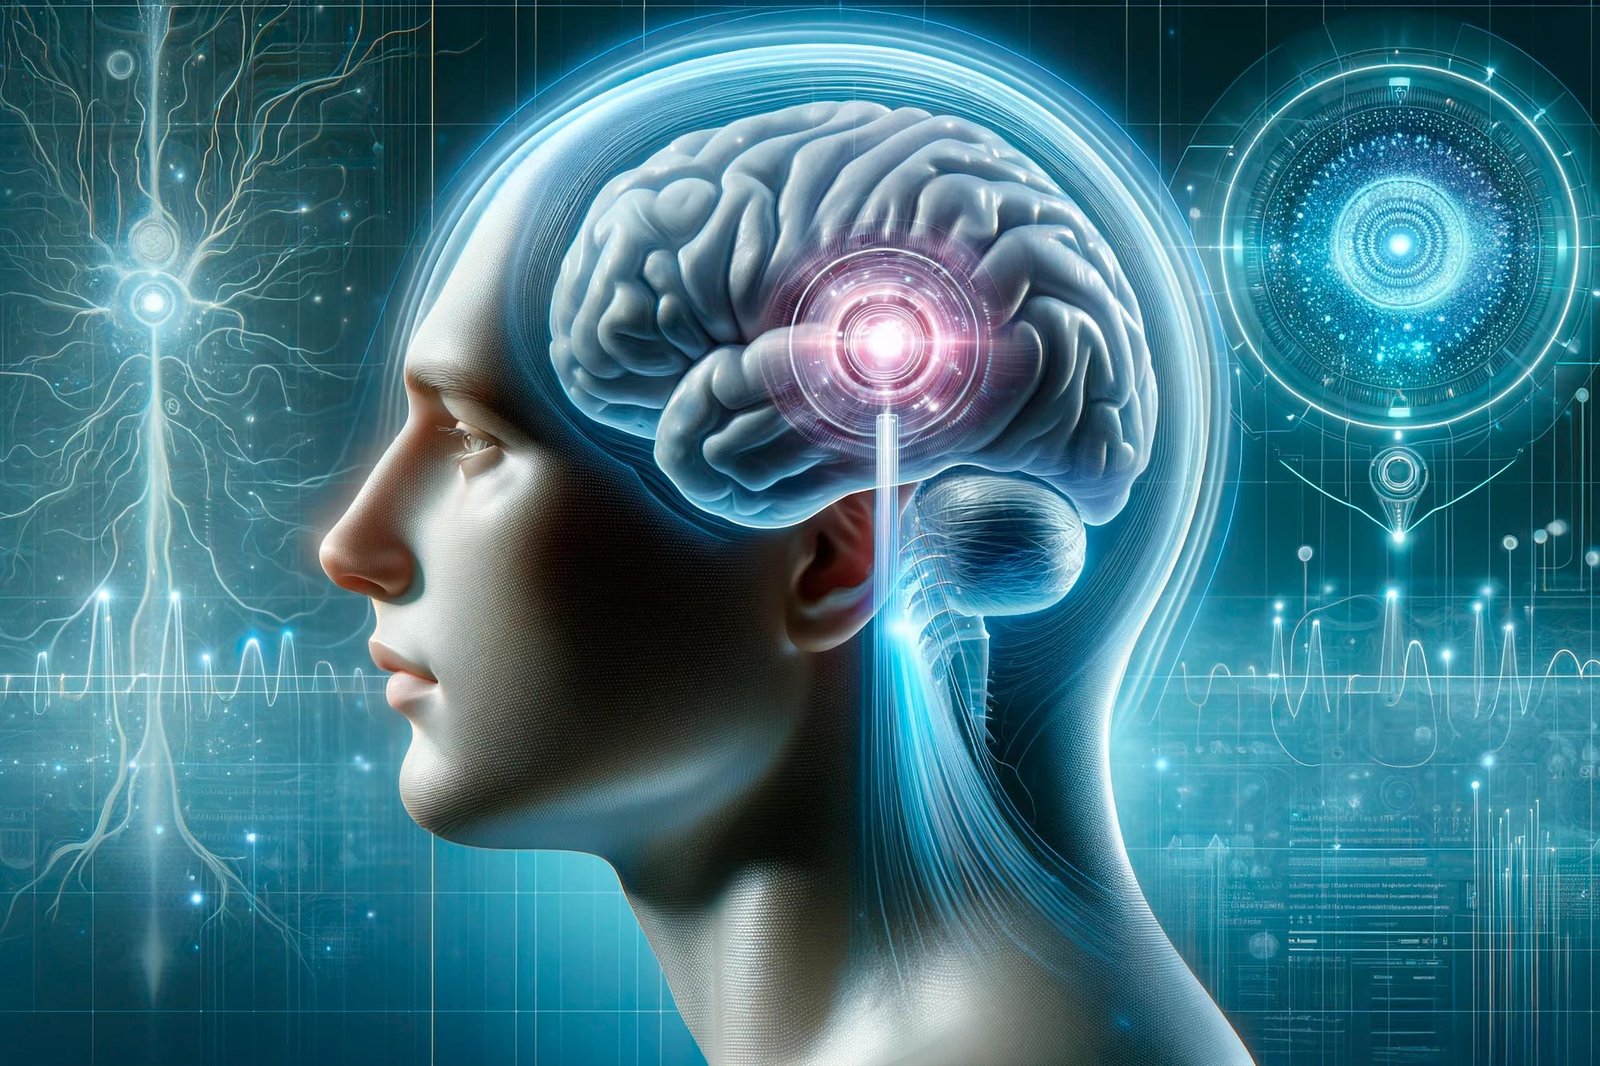 Brain Implant May Enable Communication From Thoughts Alone